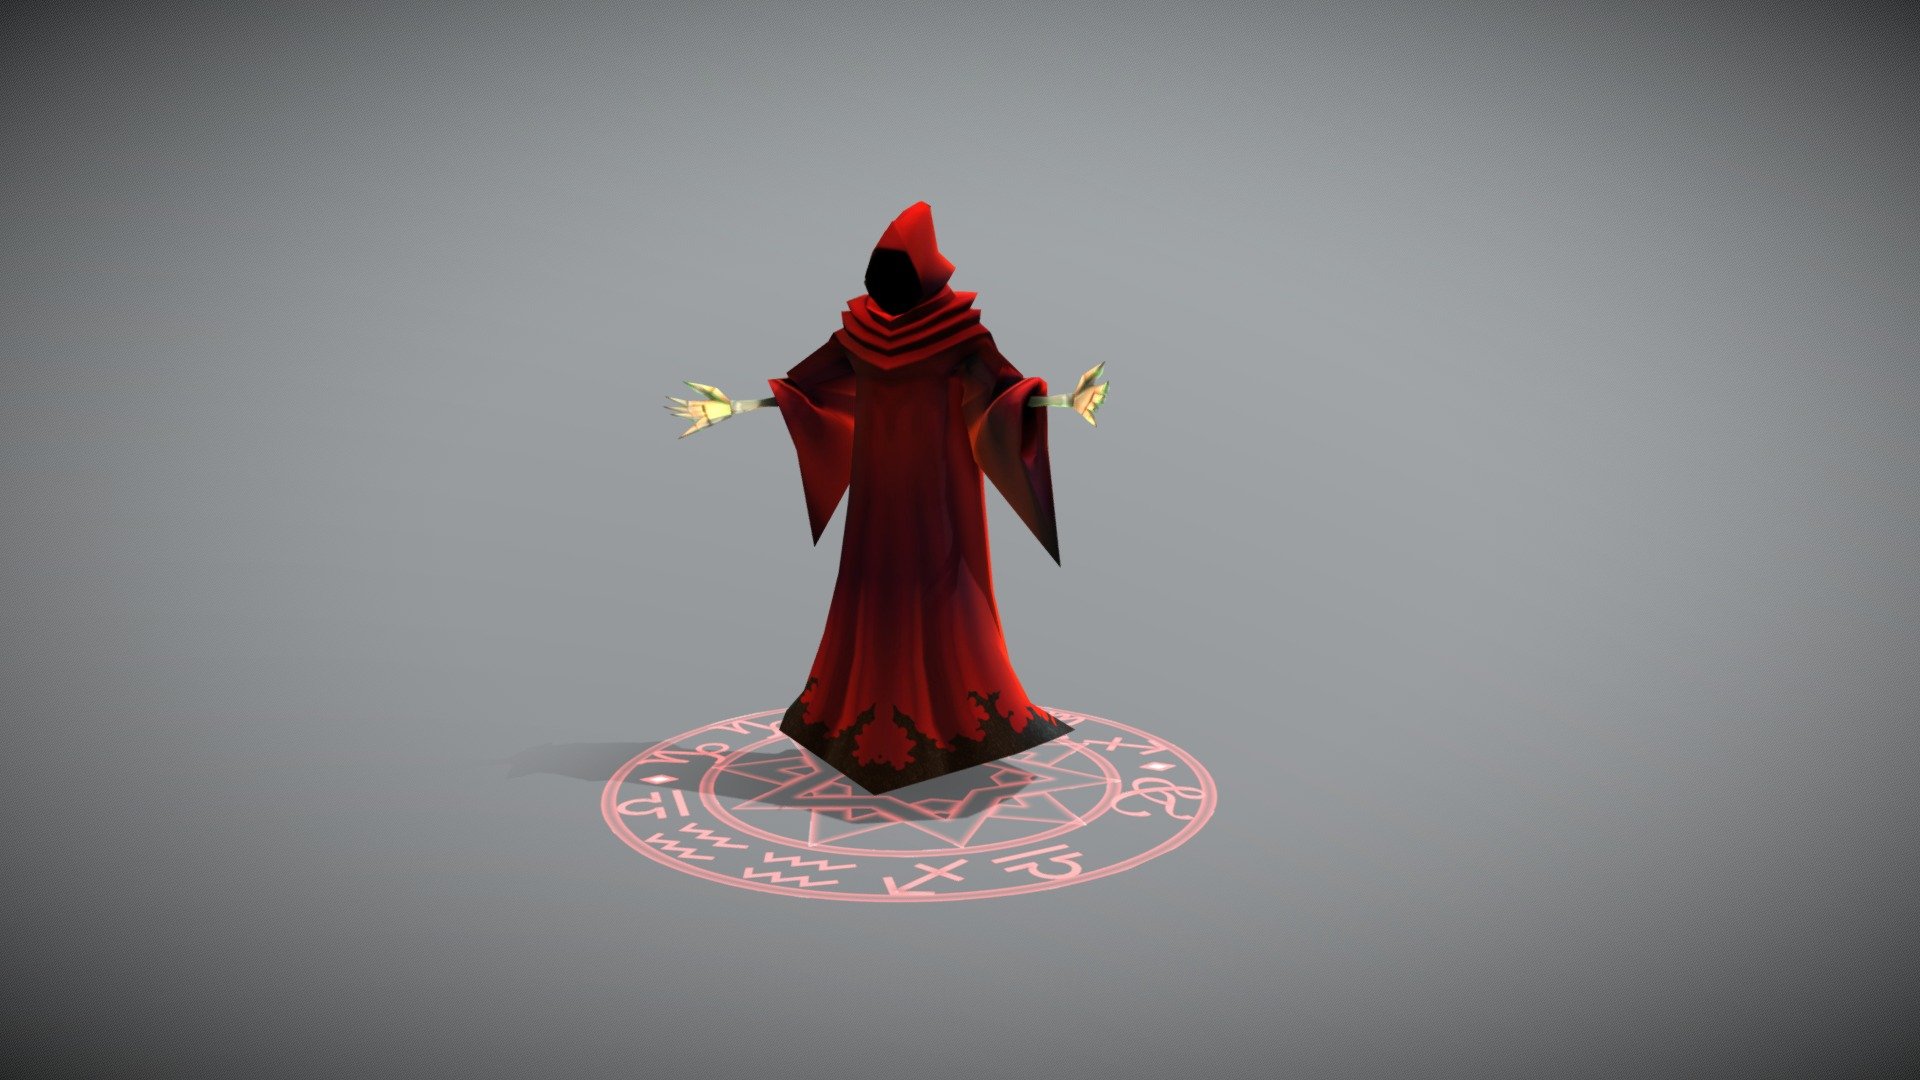 Low poly animated wizard minion - Red Wizard - 3D model by MBaglini 3d model